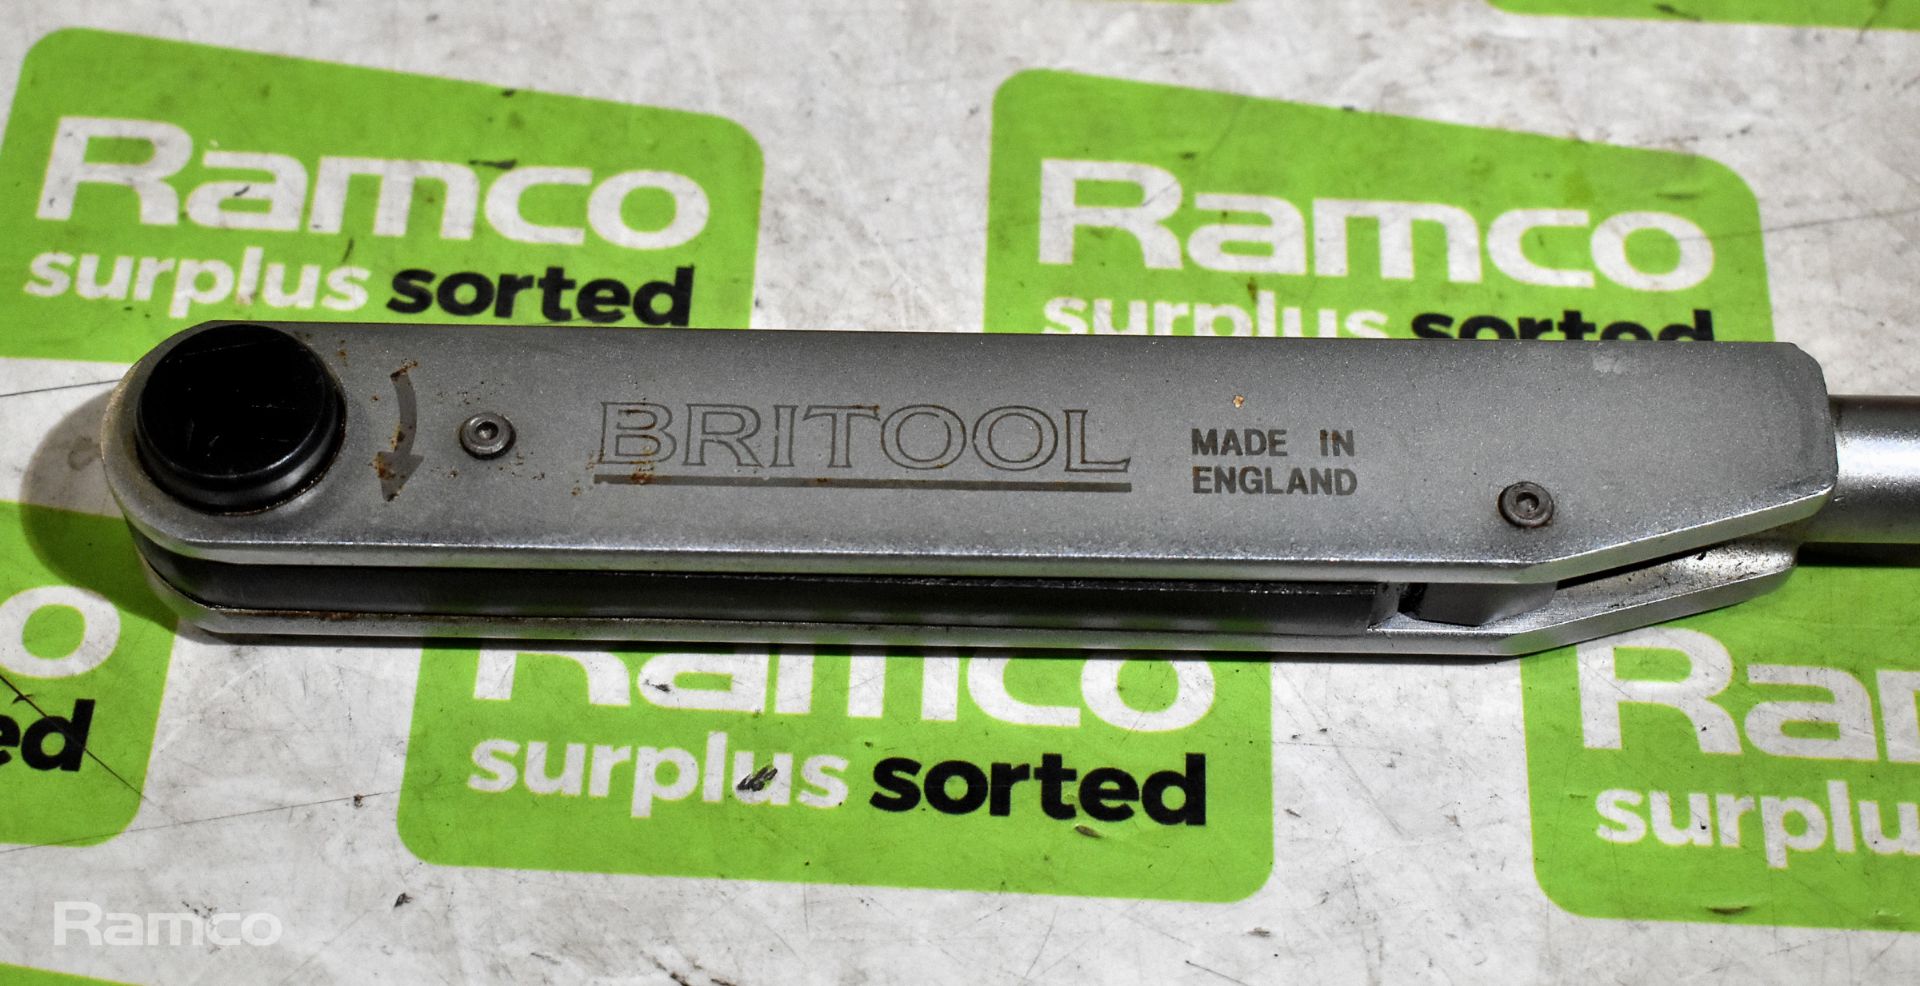 Britool EVT600A 1/2 inch torque wrench 12-68 Nm (10-50 lbf ft) - Image 2 of 4